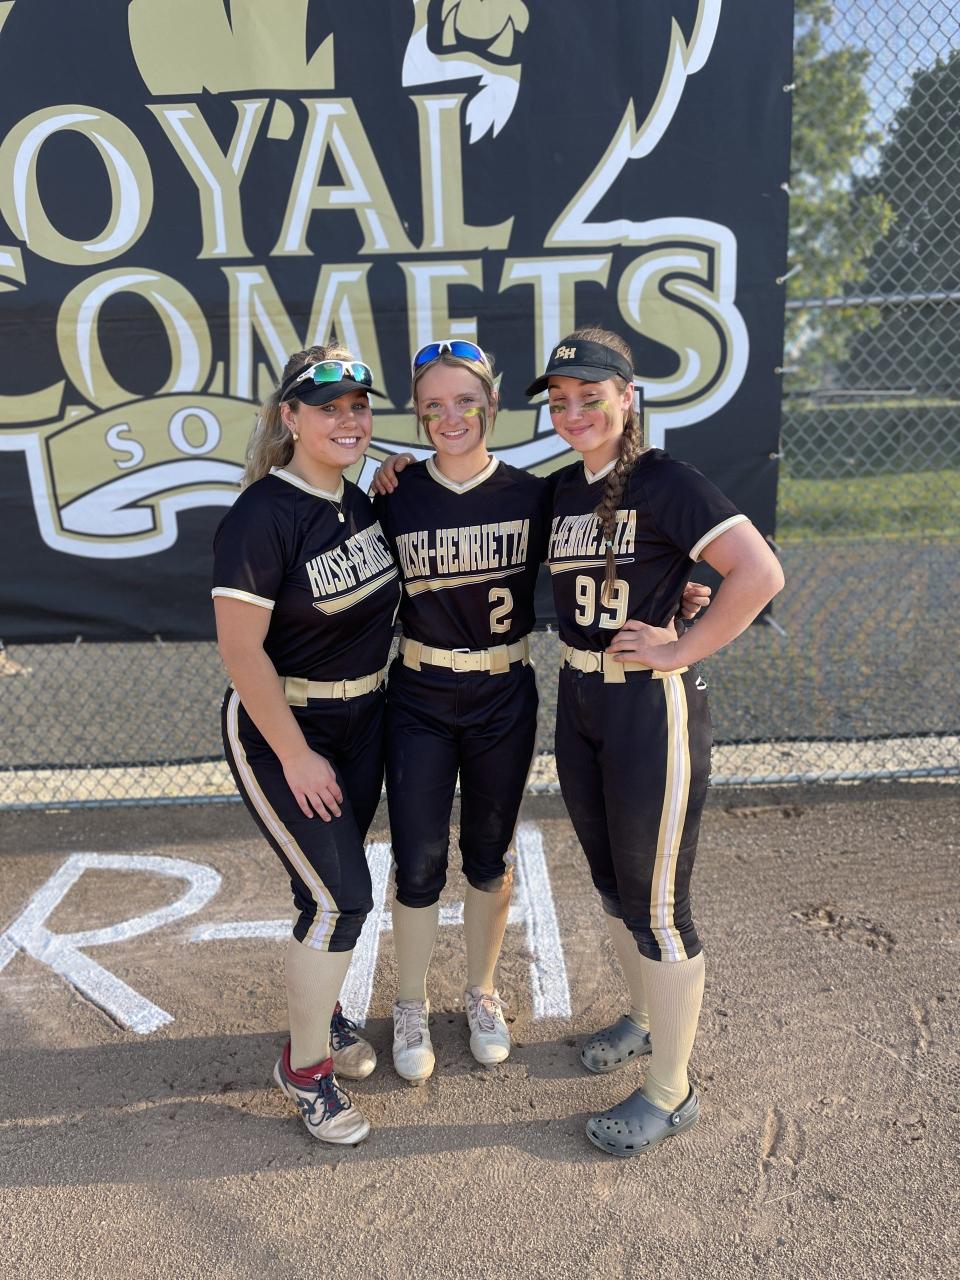 Rush-Henrietta's Olivia Sheffer, Kadyn Hartel and Elizabeth Gleghorn after a 15-0 win over Brighton to clinch what is believed to be program's first Section V final.